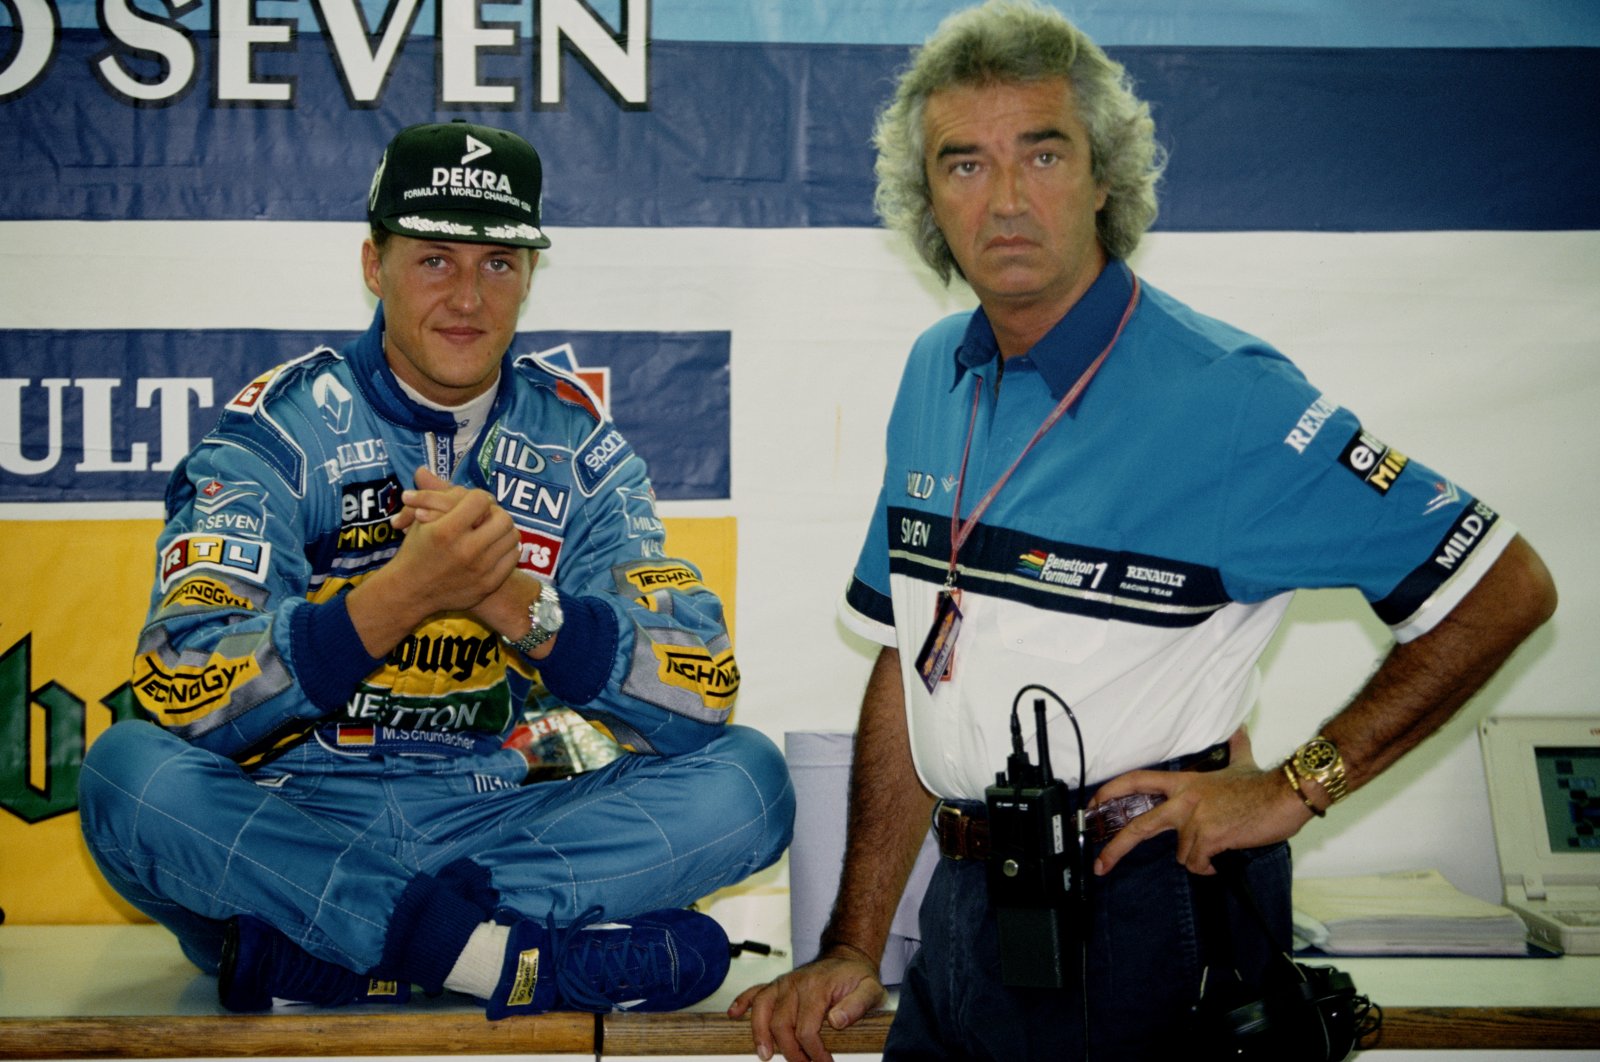 Germany&#039;s Michael Schumacher (L) of the #1 Mild Seven Benetton Ford Benetton B195 Renault V10 talking with team director Flavio Briatore (R) during practice for the Italian Grand Prix at the Autodromo Nazionale Monza. Monza, Italy, Sept. 10 1995. (Getty Images Photo)